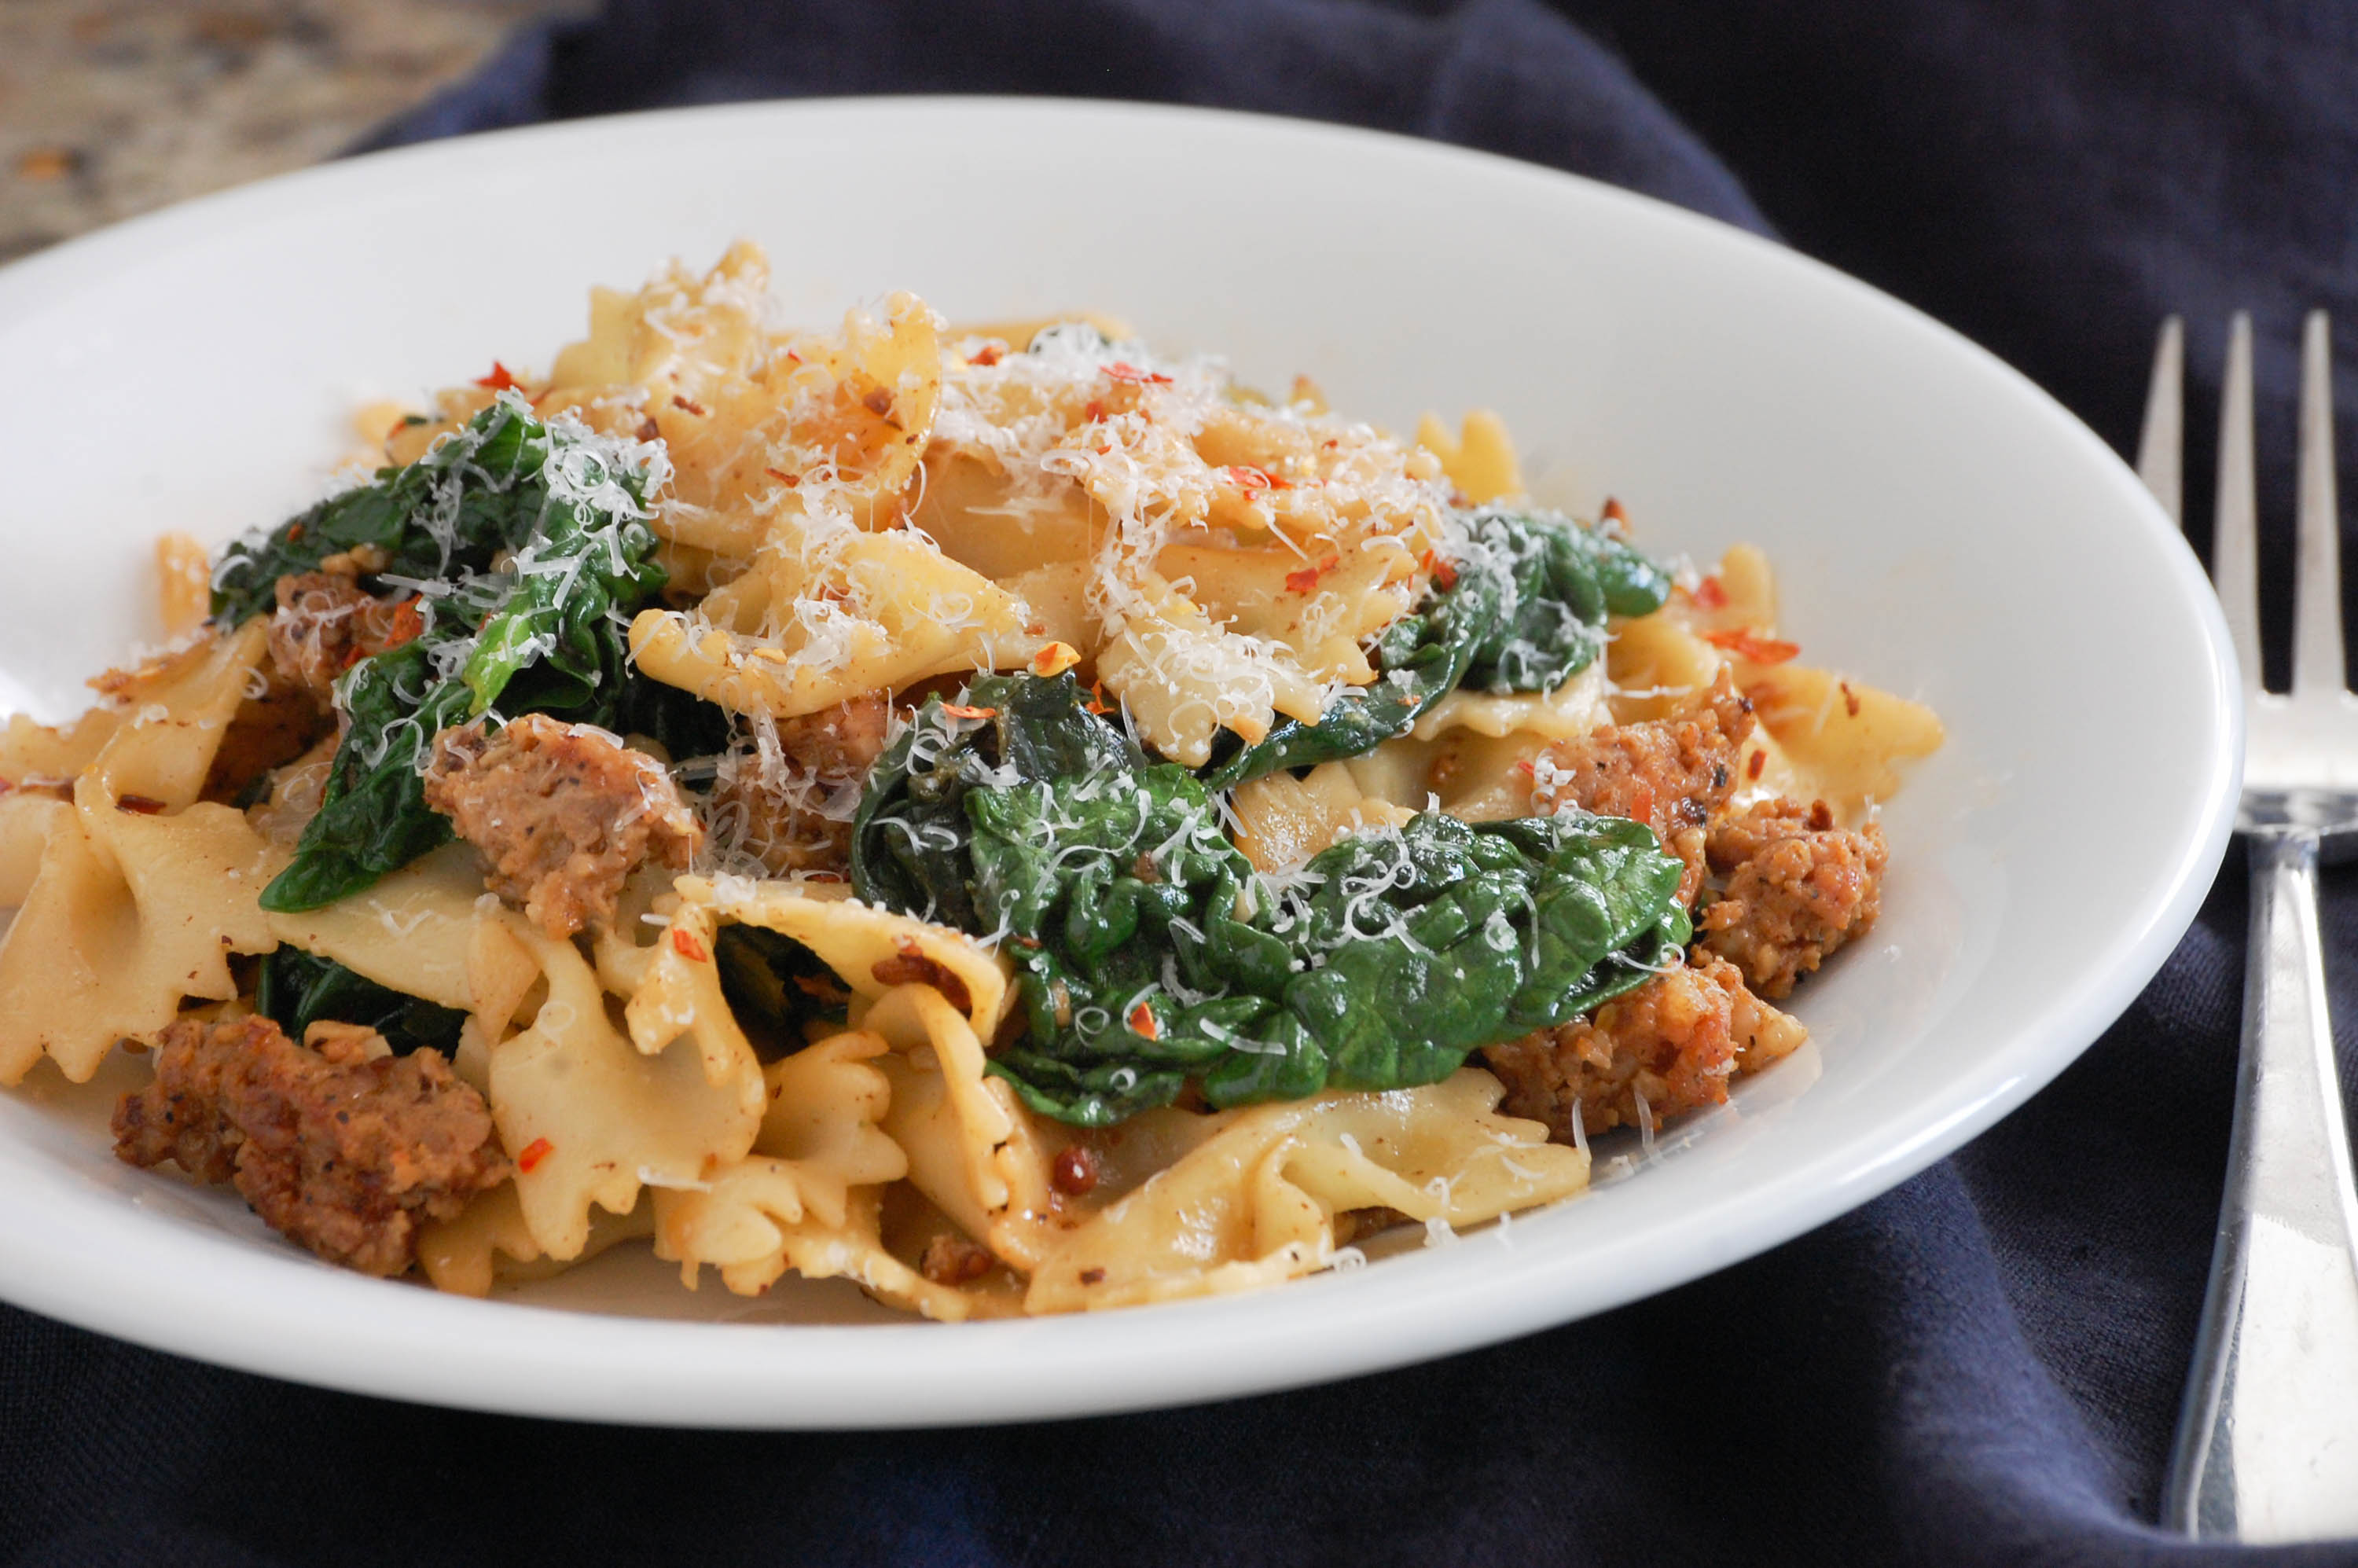 Spicy Pasta with Sausage and Spinach via The District Table